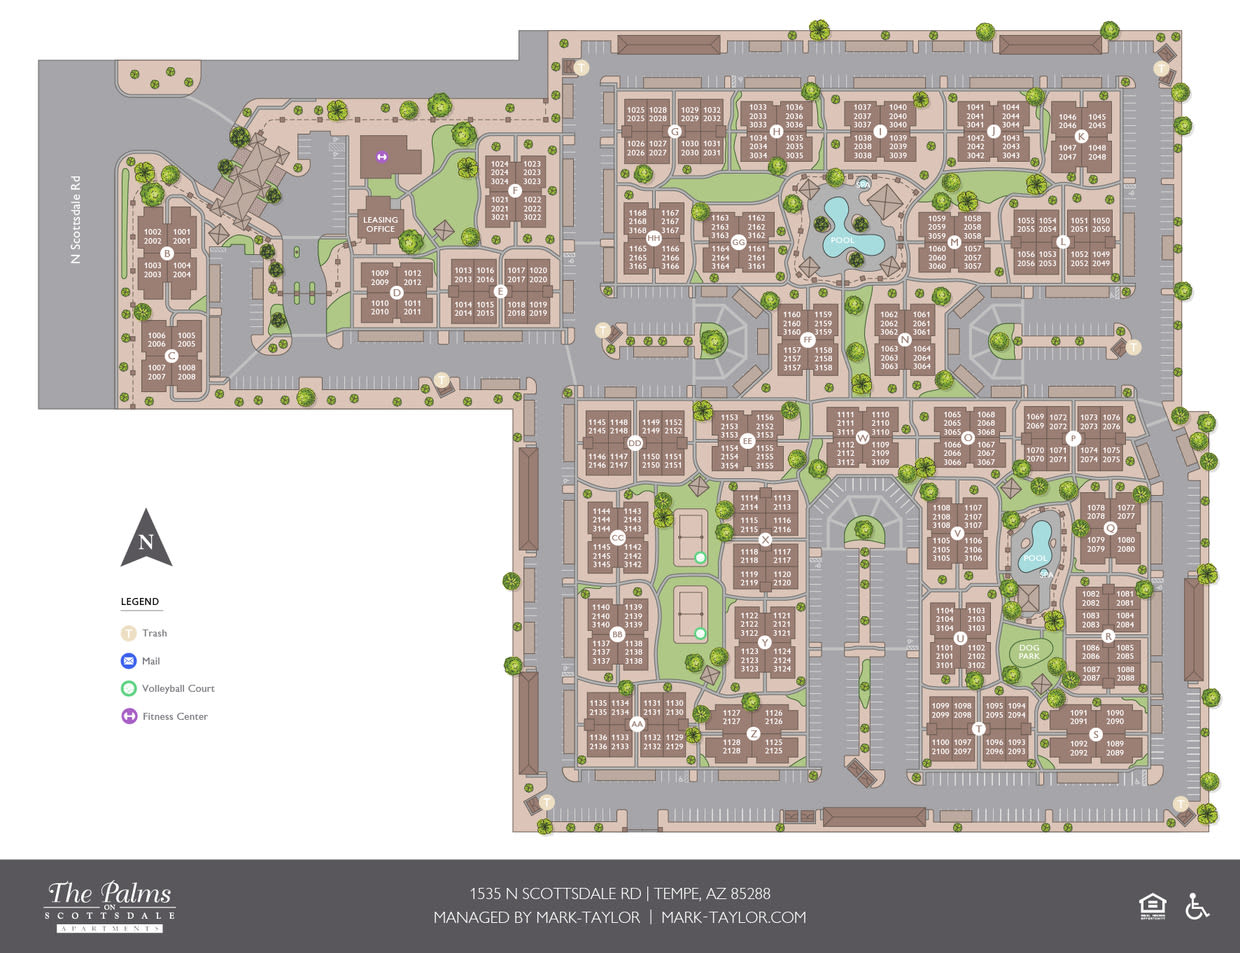 Site map for The Palms on Scottsdale in Tempe, Arizona